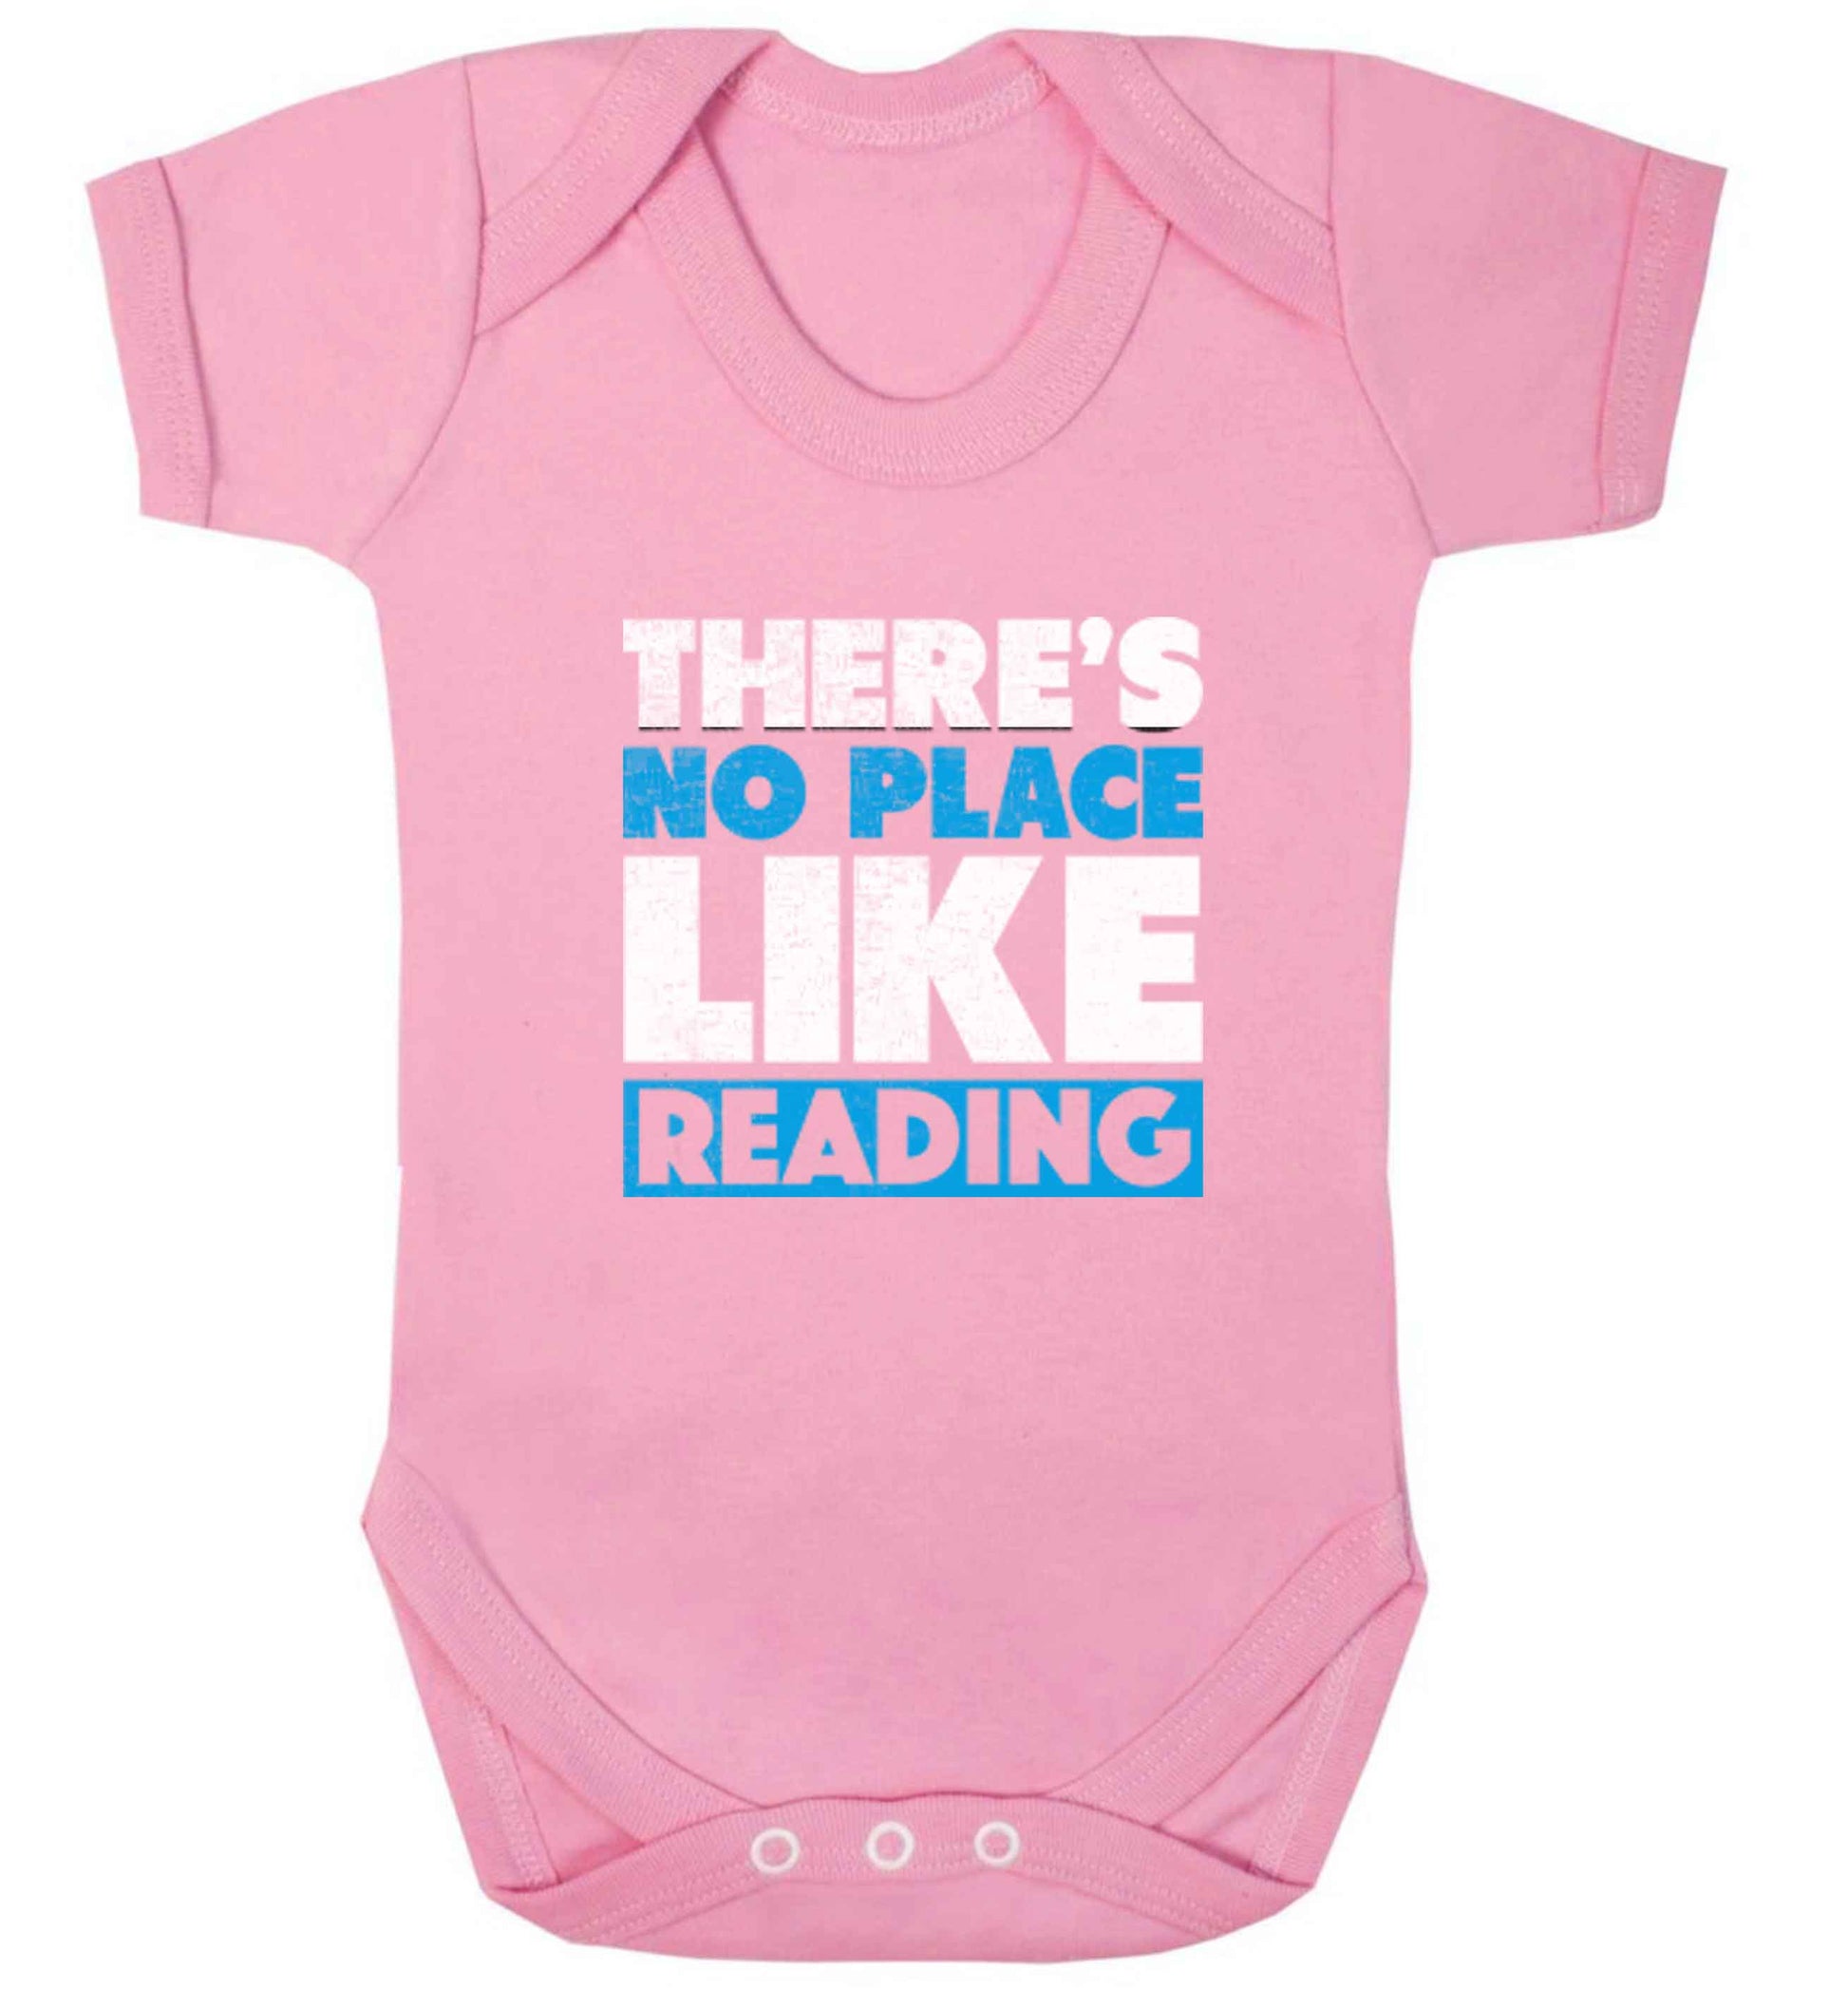 There's no place like Readingbaby vest pale pink 18-24 months